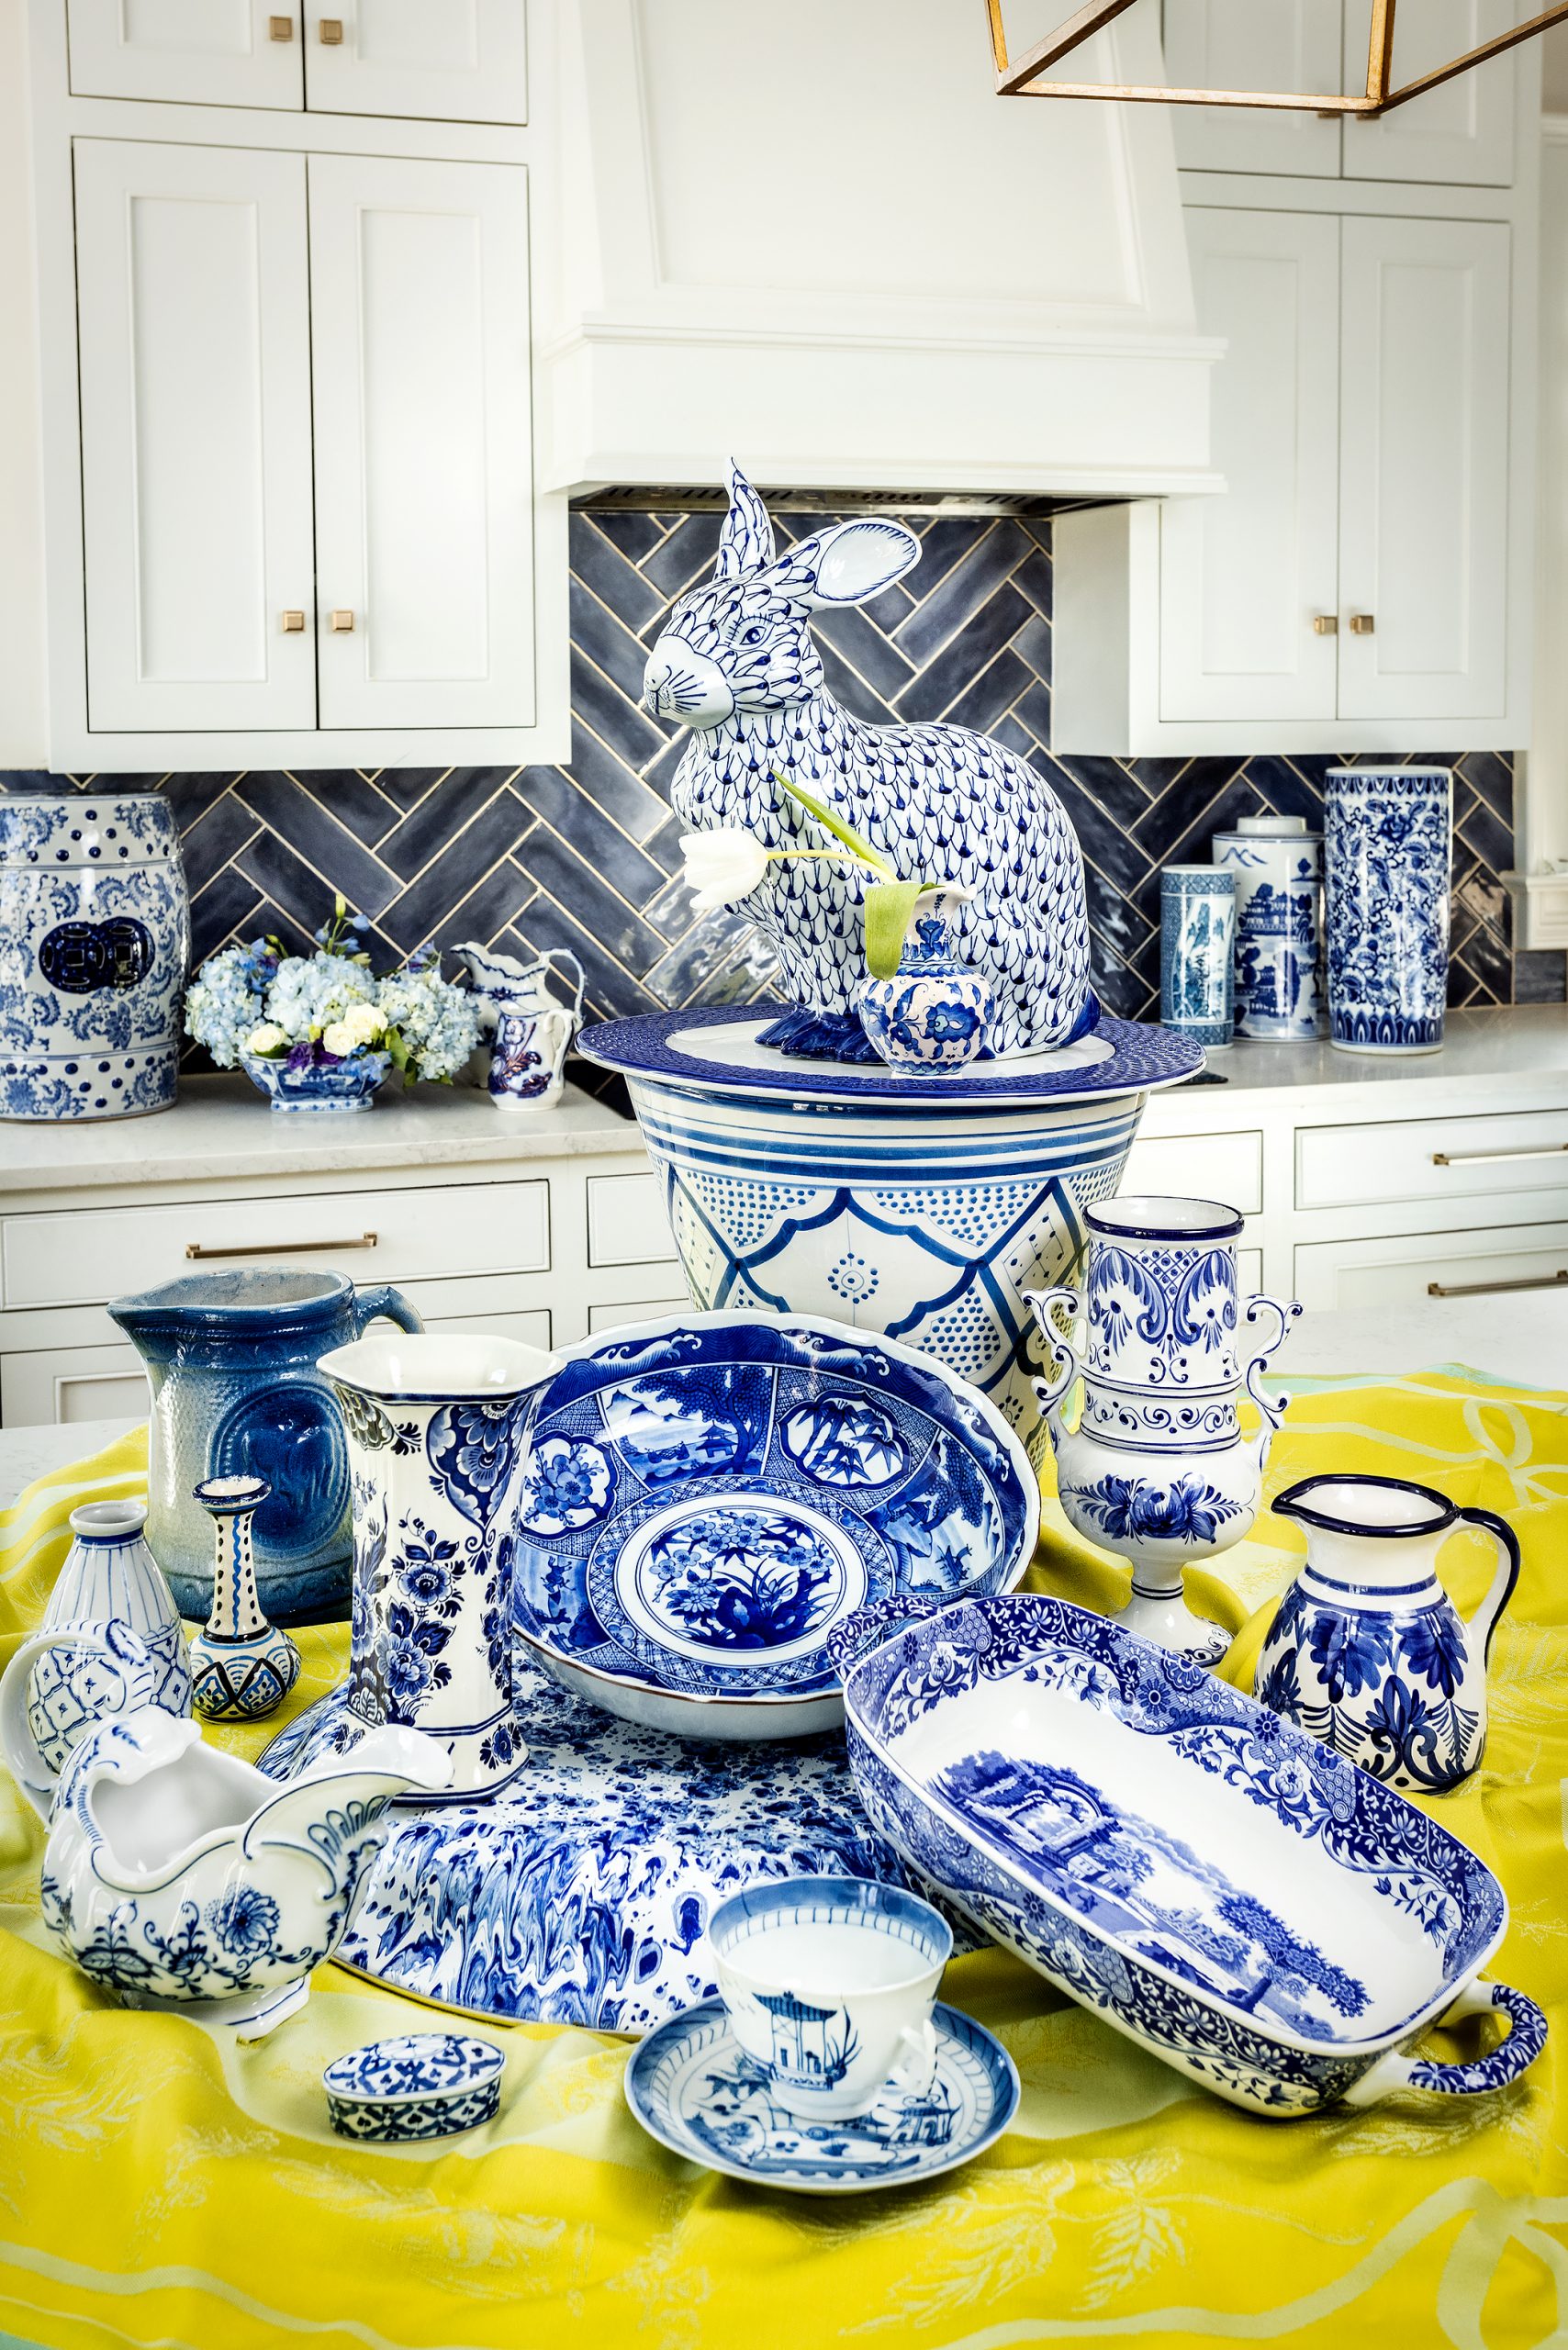 Blue and white pottery was first introduced in China in the 600s during the Tang dynasty and since then has made its way around the world in a myriad of different styles. Going clockwise, the small vase with the white tulip is from Iznik, Turkey; cylindrical vase, Mexico; small pitcher, Spain; Spode casserole dish, England; Export Canton tea cup and saucer, China; Onion Meissen gravy boat, Germany; diamond and striped vase, Japan; thin-neck vase, Iznik, Turkey; Saltware pitcher, America; hexagonal Delft vase on top of splatterware tray, the Netherlands; bowl in the middle, Japan; flower container in the back, Morocco; Tiffany & Co. plate, America; and the bunny is “modern Chinese export.”